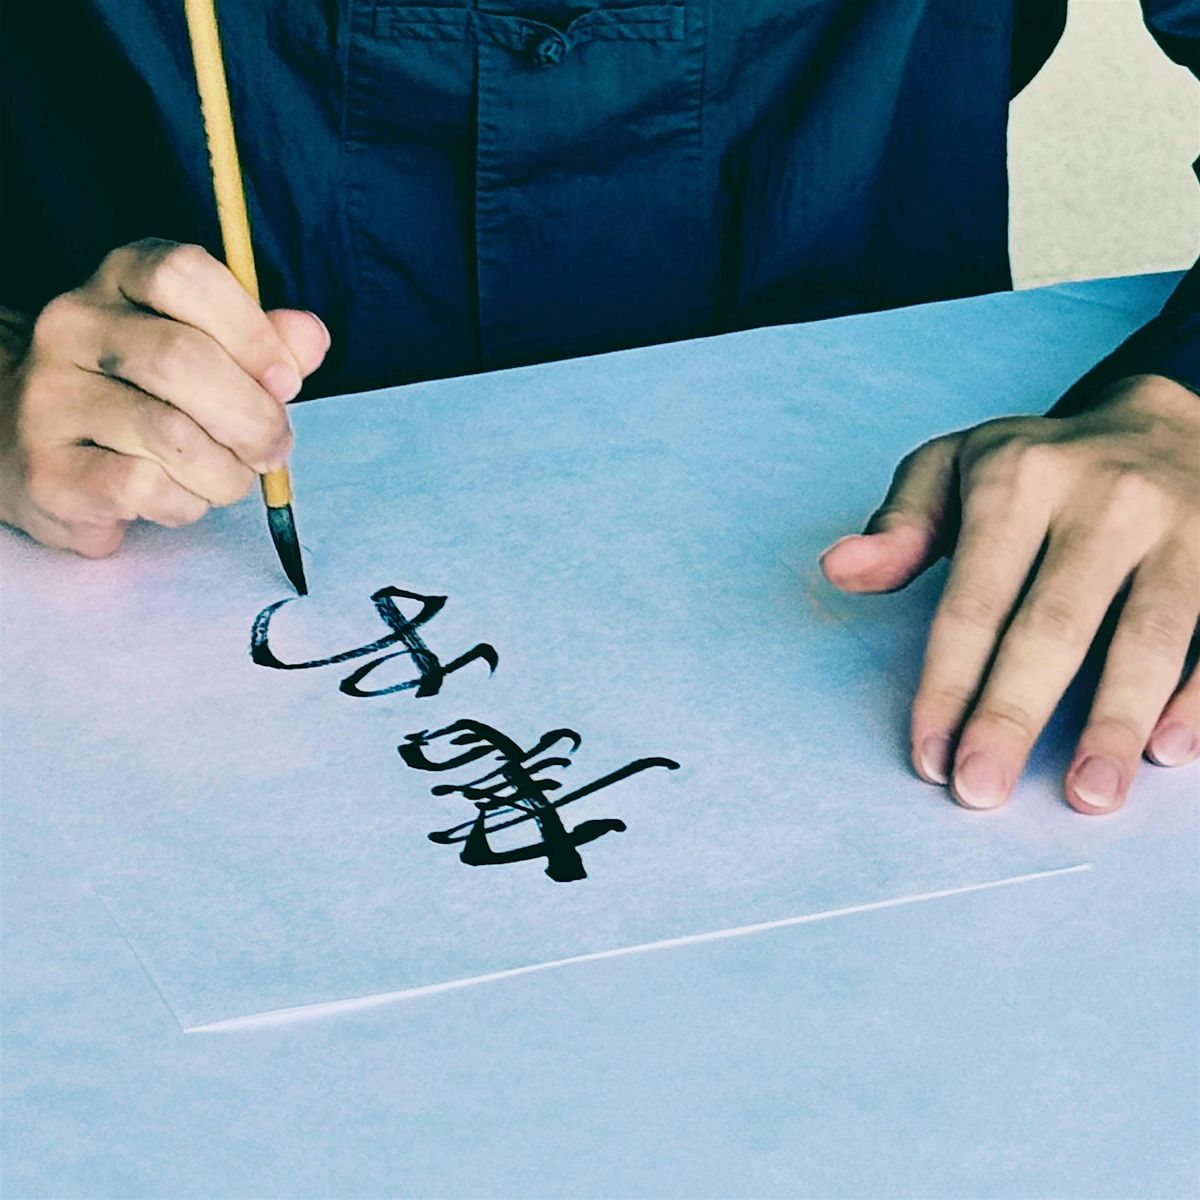 Calligraphy Workshop with Yuzhe Cao